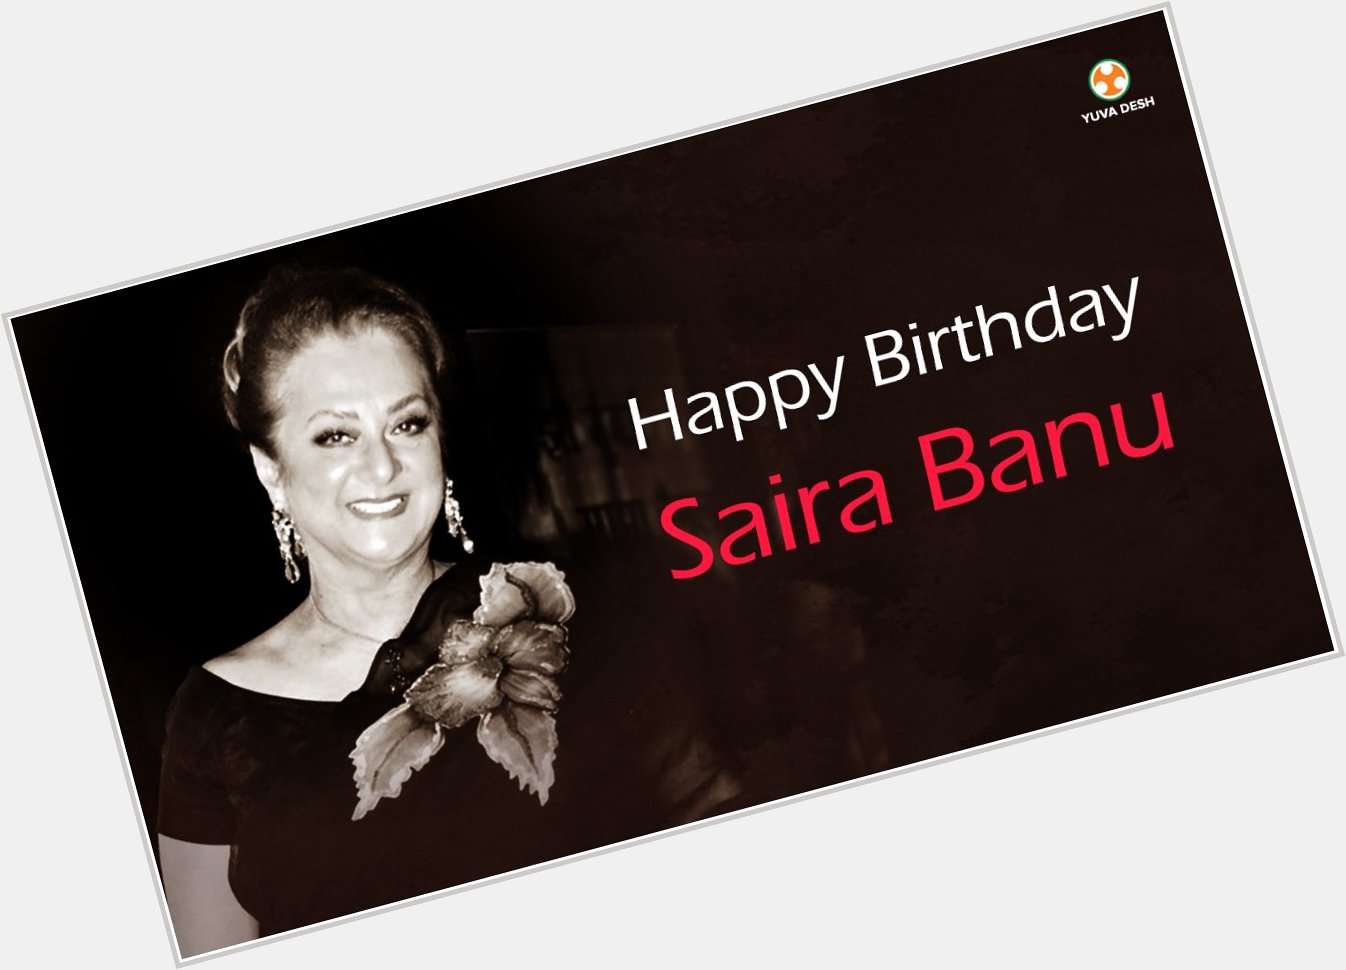 Team wishes a very happy birthday to the best actress of her time Saira Banu! 